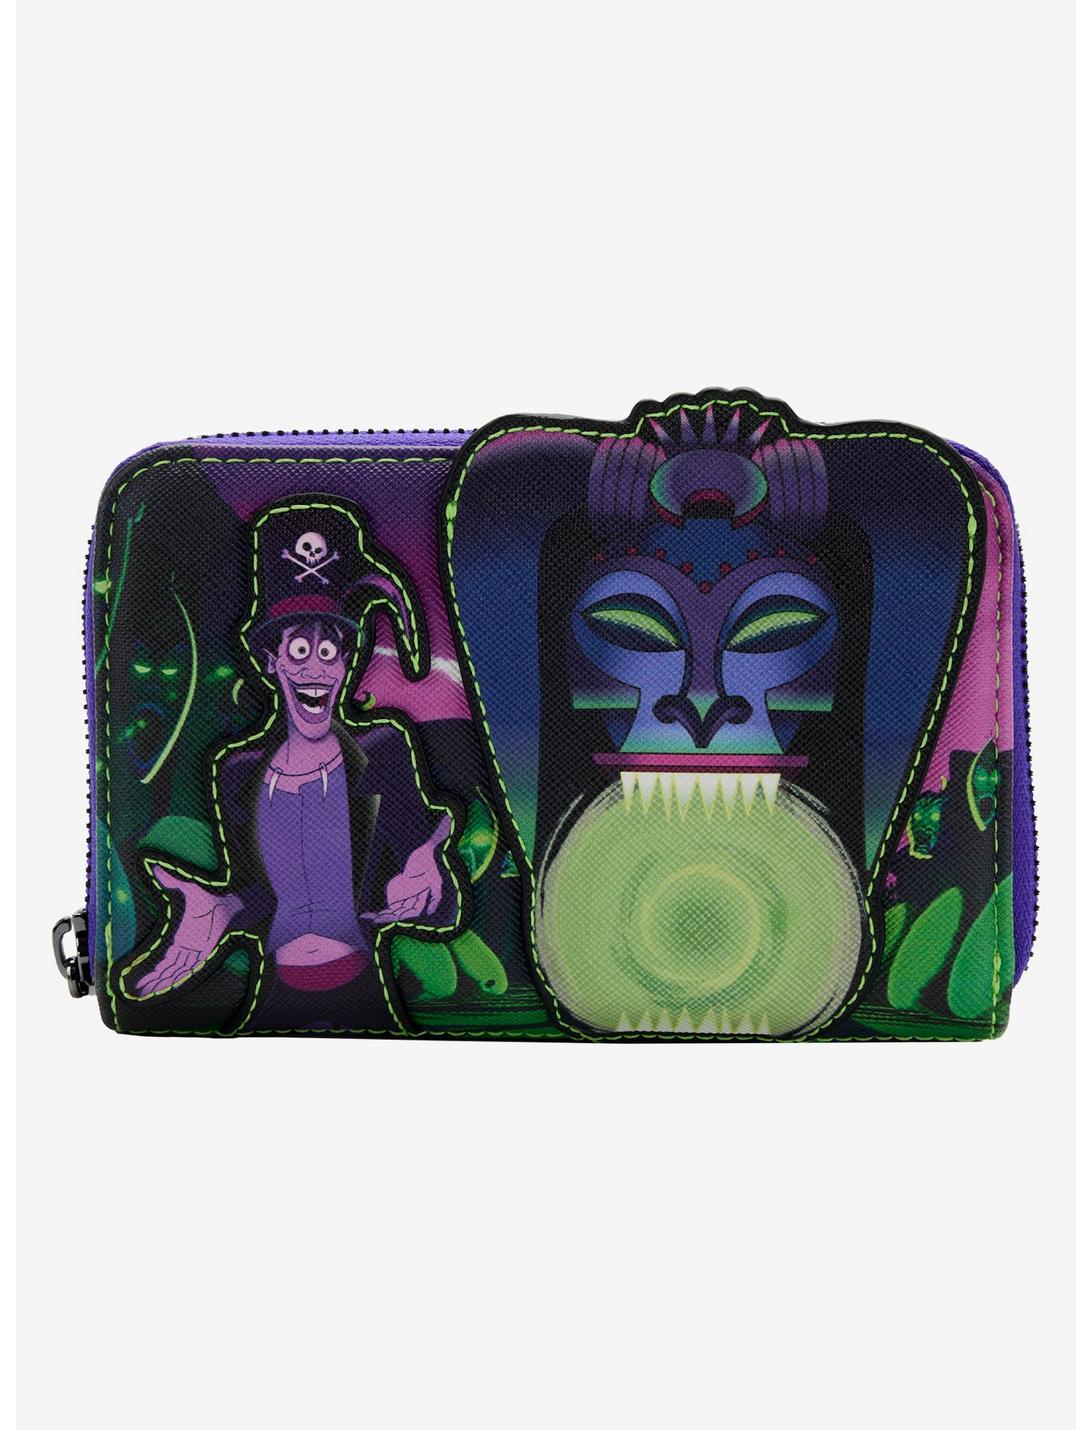 Loungefly Disney The Princess And The Frog Dr. Facilier Glow-In-The-Dark Zipper Wallet, , hi-res